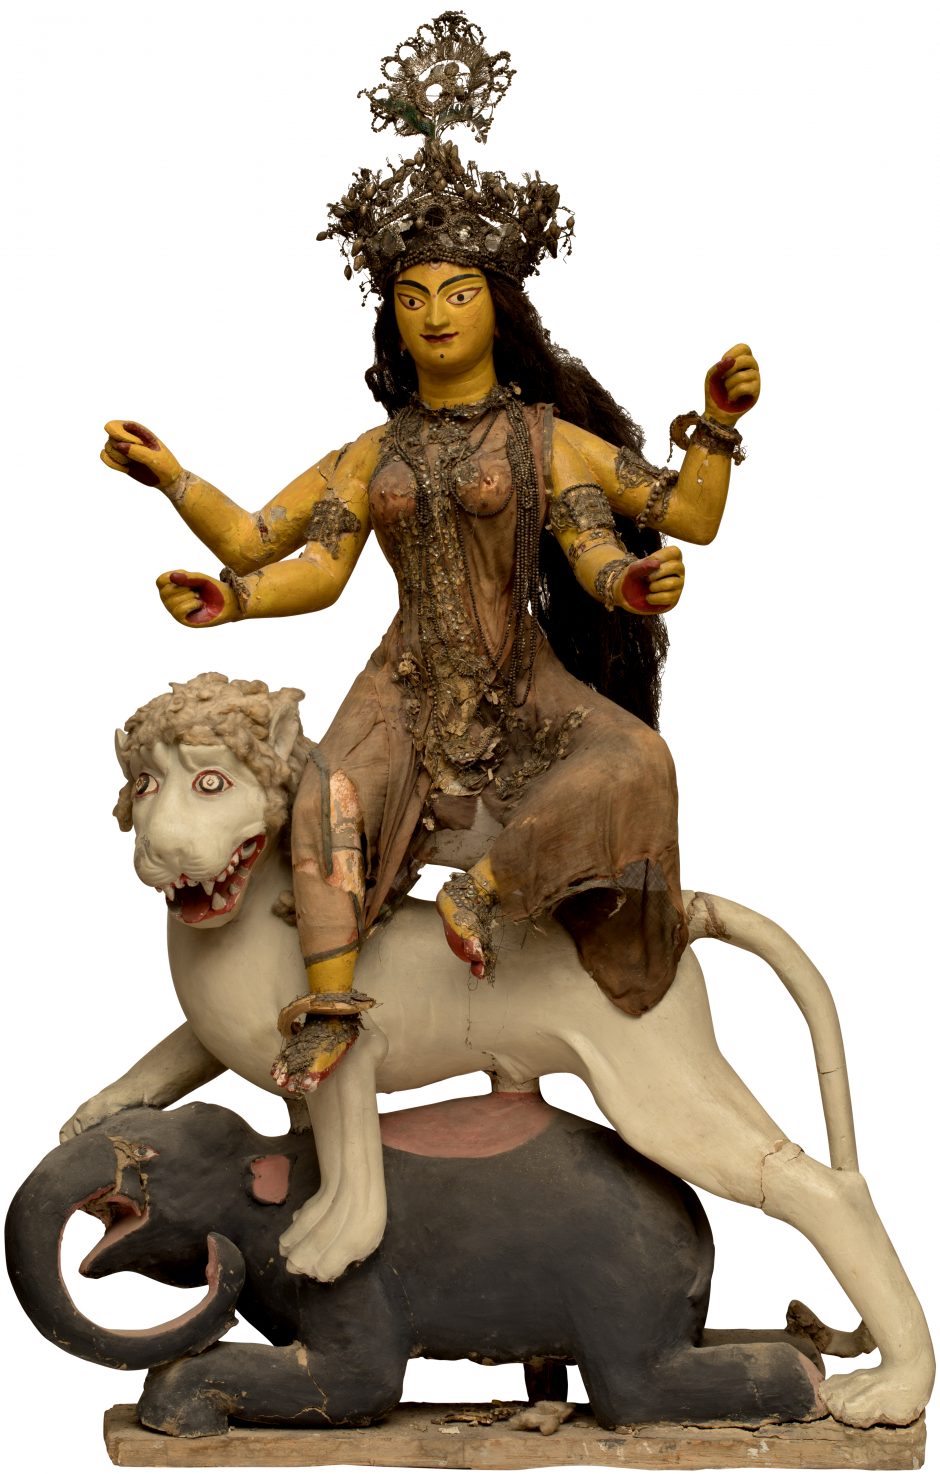 Figure of the goddess Durga with four arms sitting on a lion and an elephant